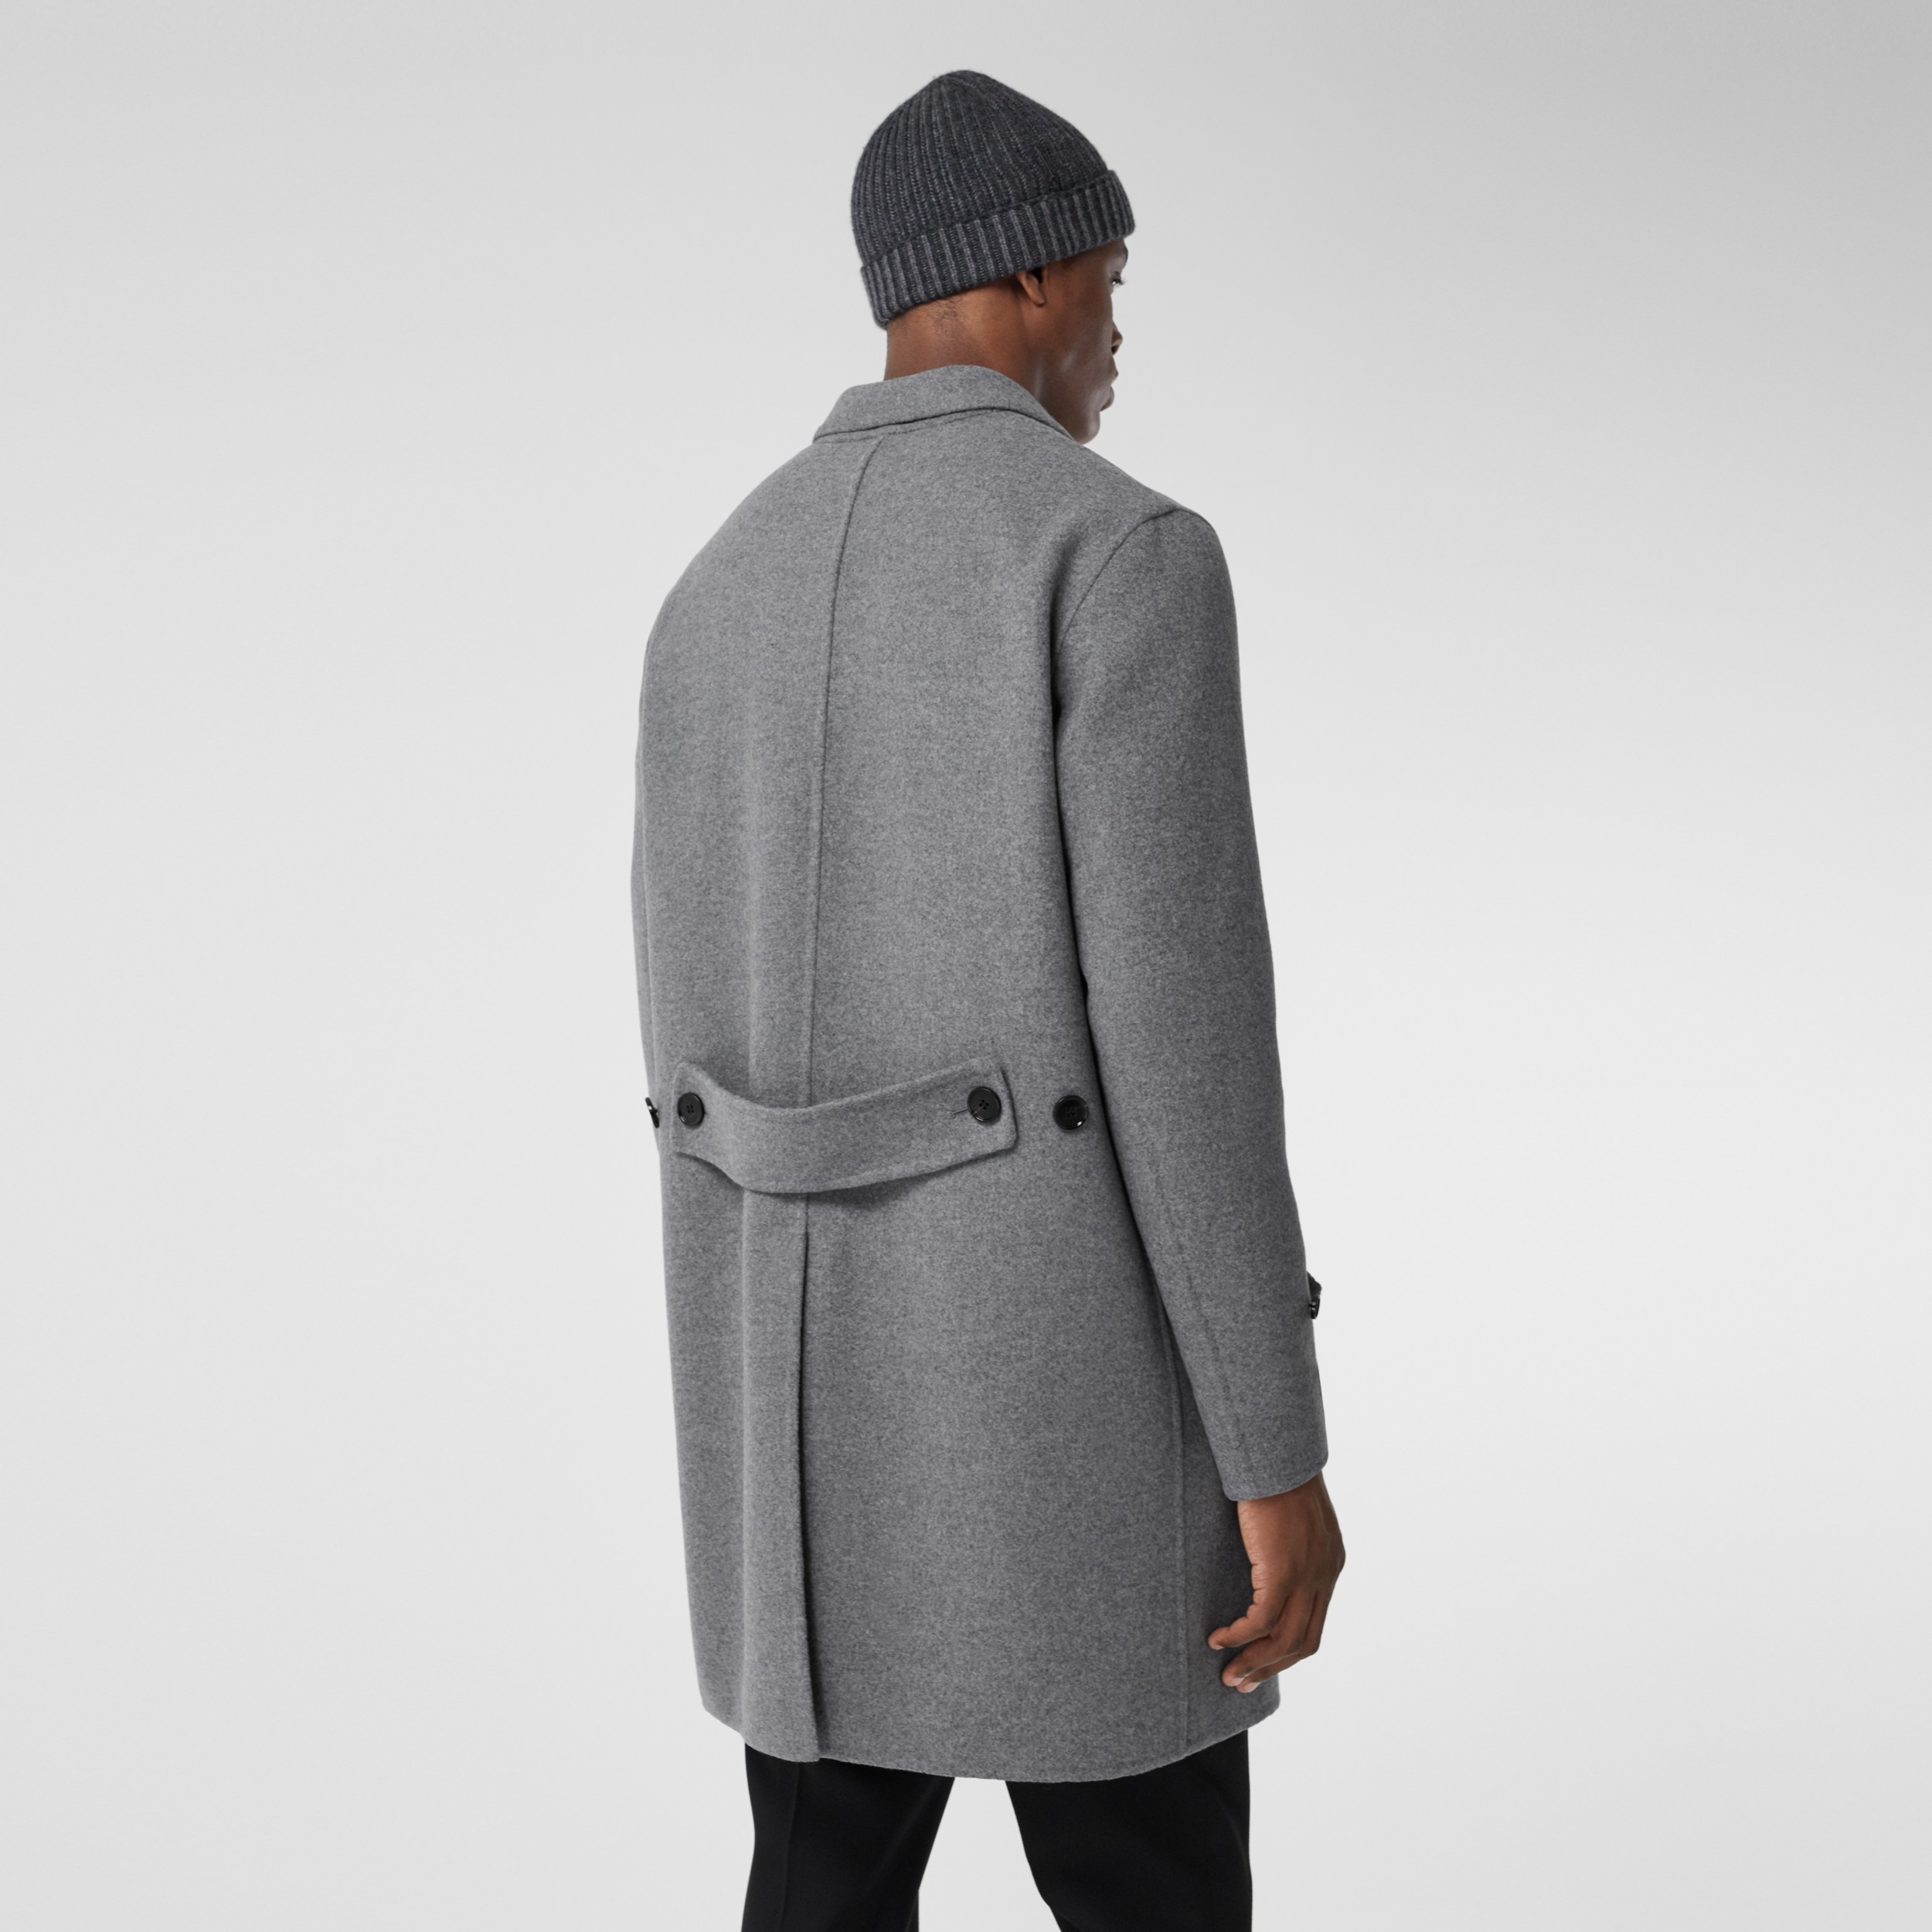 Wool Cashmere Lab Coat in Charcoal - Men | Burberry United States